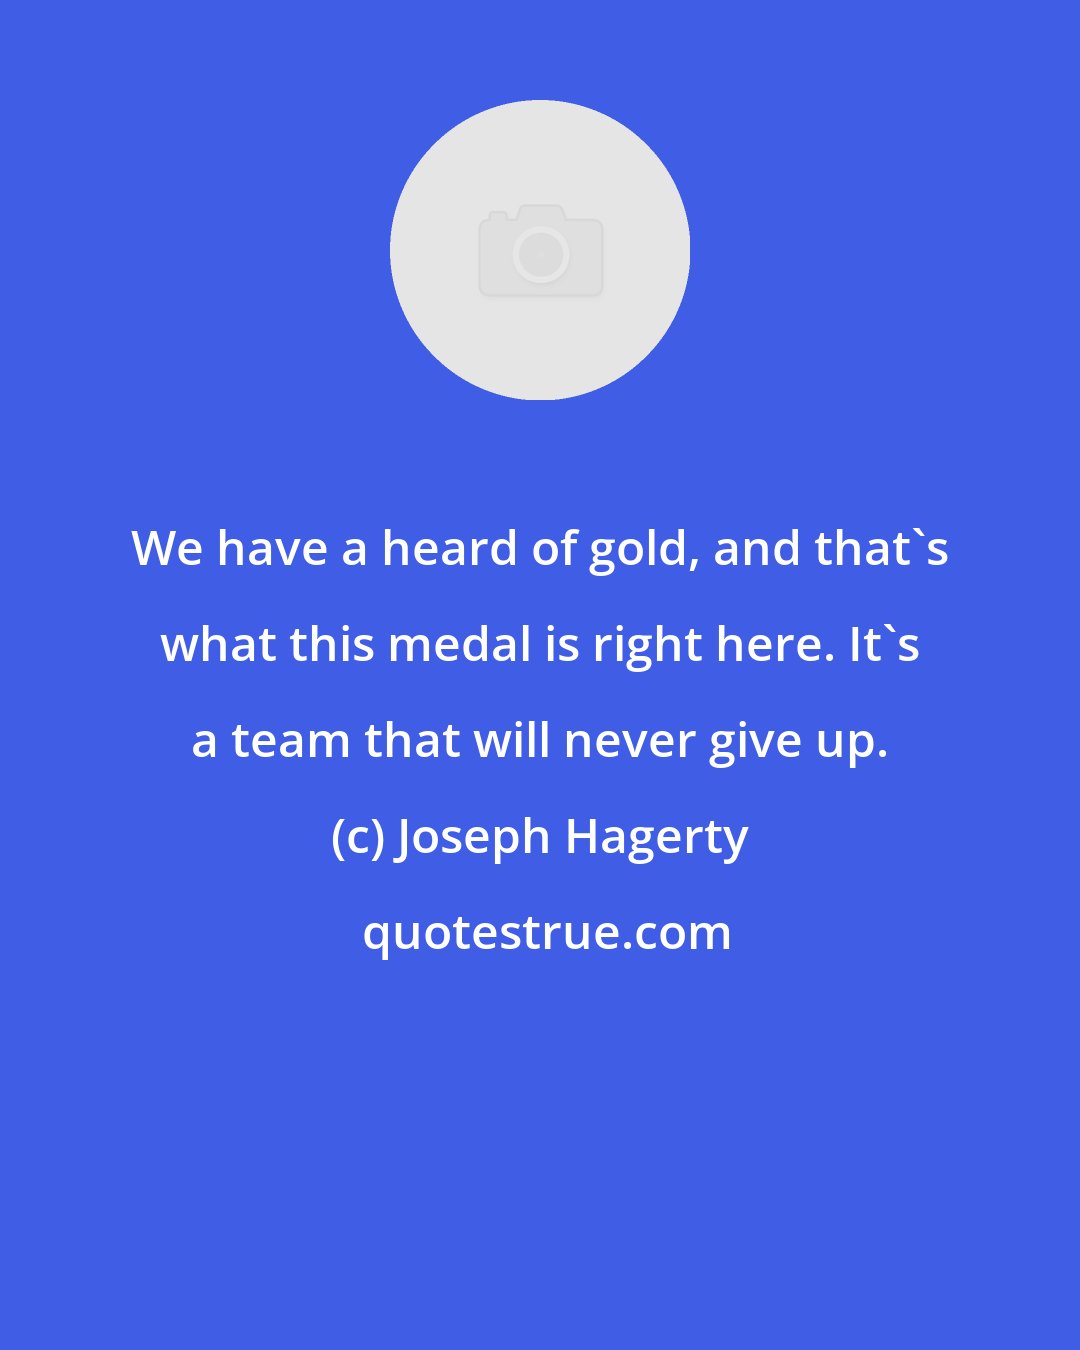 Joseph Hagerty: We have a heard of gold, and that's what this medal is right here. It's a team that will never give up.